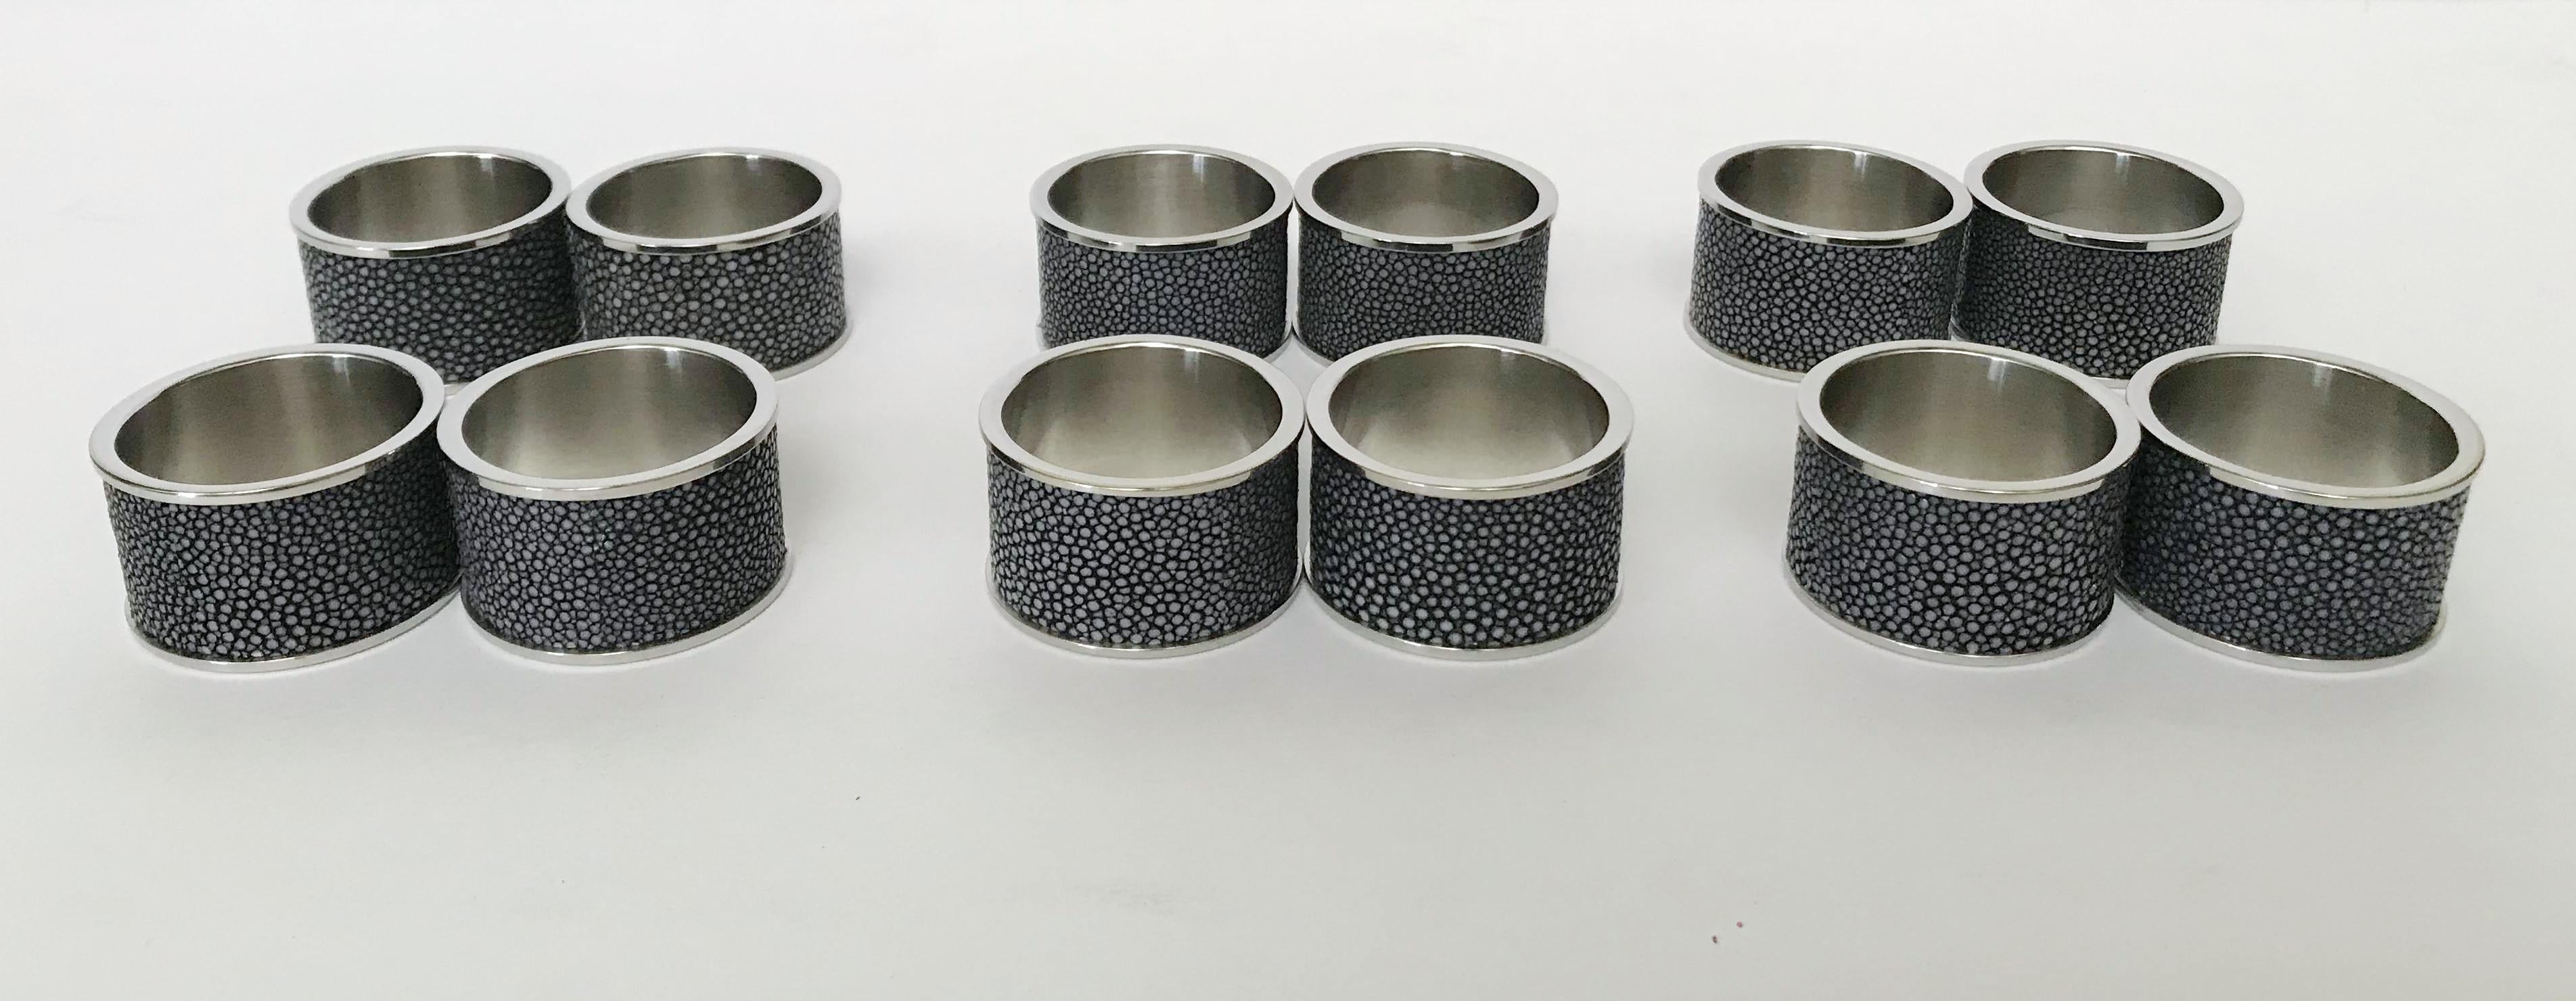 Italian black shagreen and stainless steel napkin rings with matching black leather boxes designed by Fabio Bergomi for Fabio Ltd / Made in Italy 
Each ring has diameter 1.5 inches and width 1 inch
LAST SET OF 12 RINGS (2 per box) in stock in Los